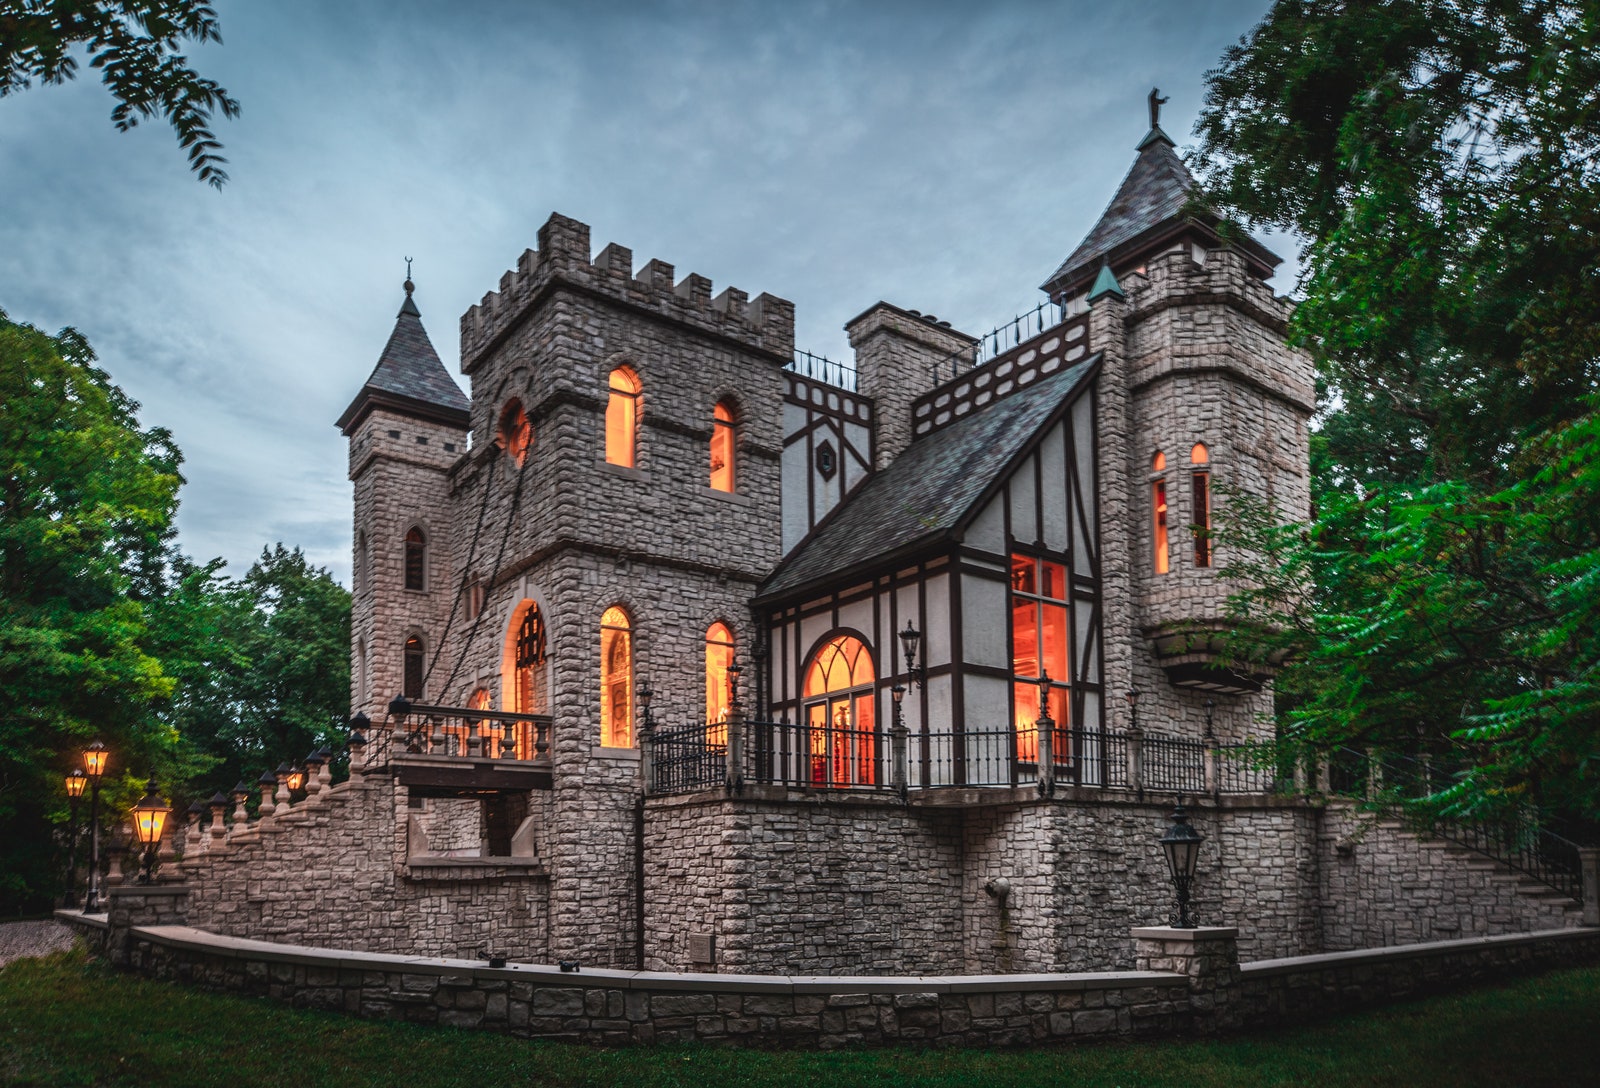 A medievalinspired castle home in Michigan.